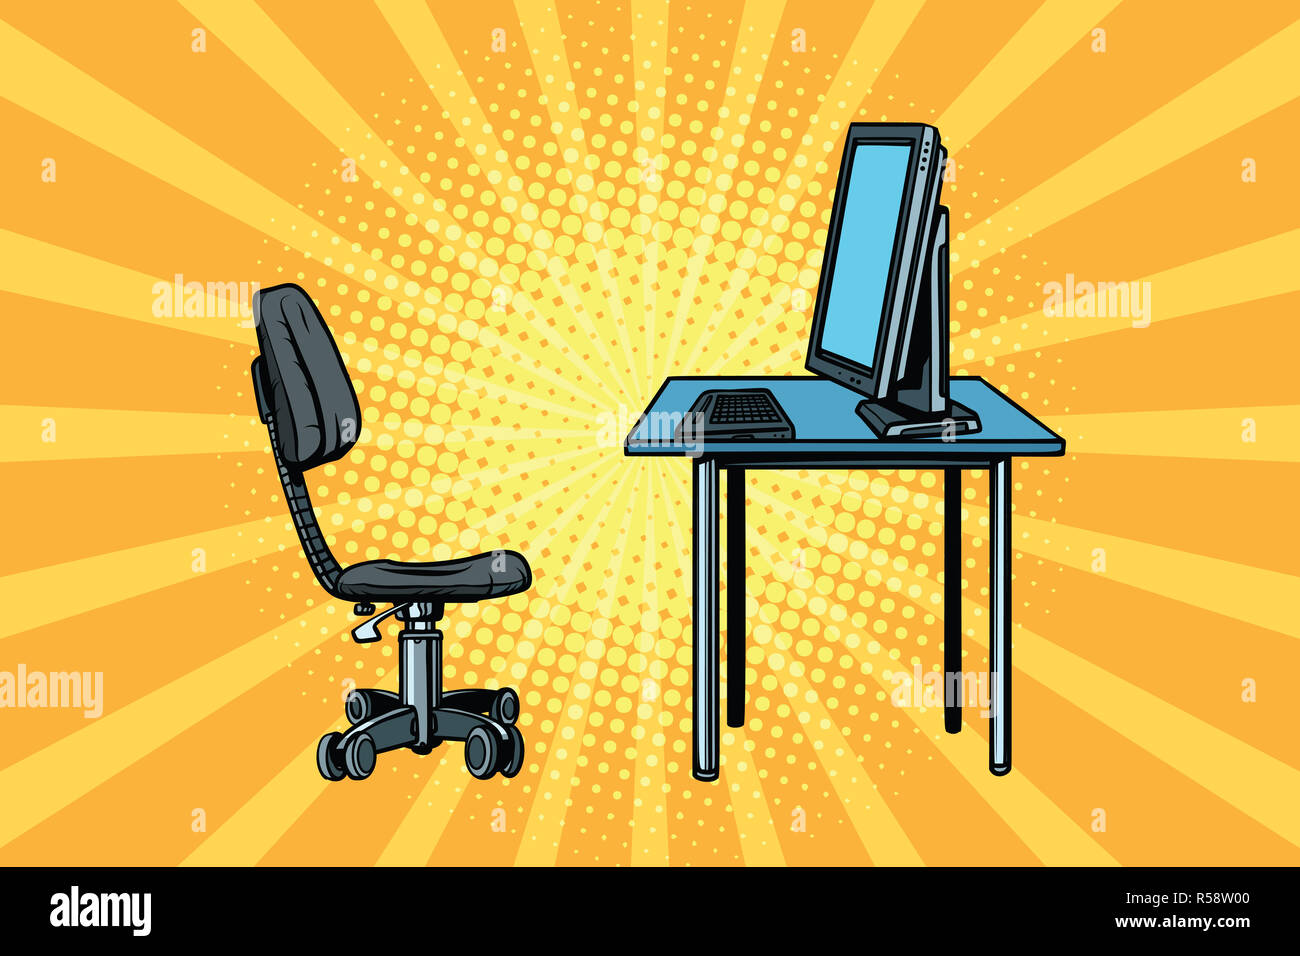 computer workstation and chair Stock Photo